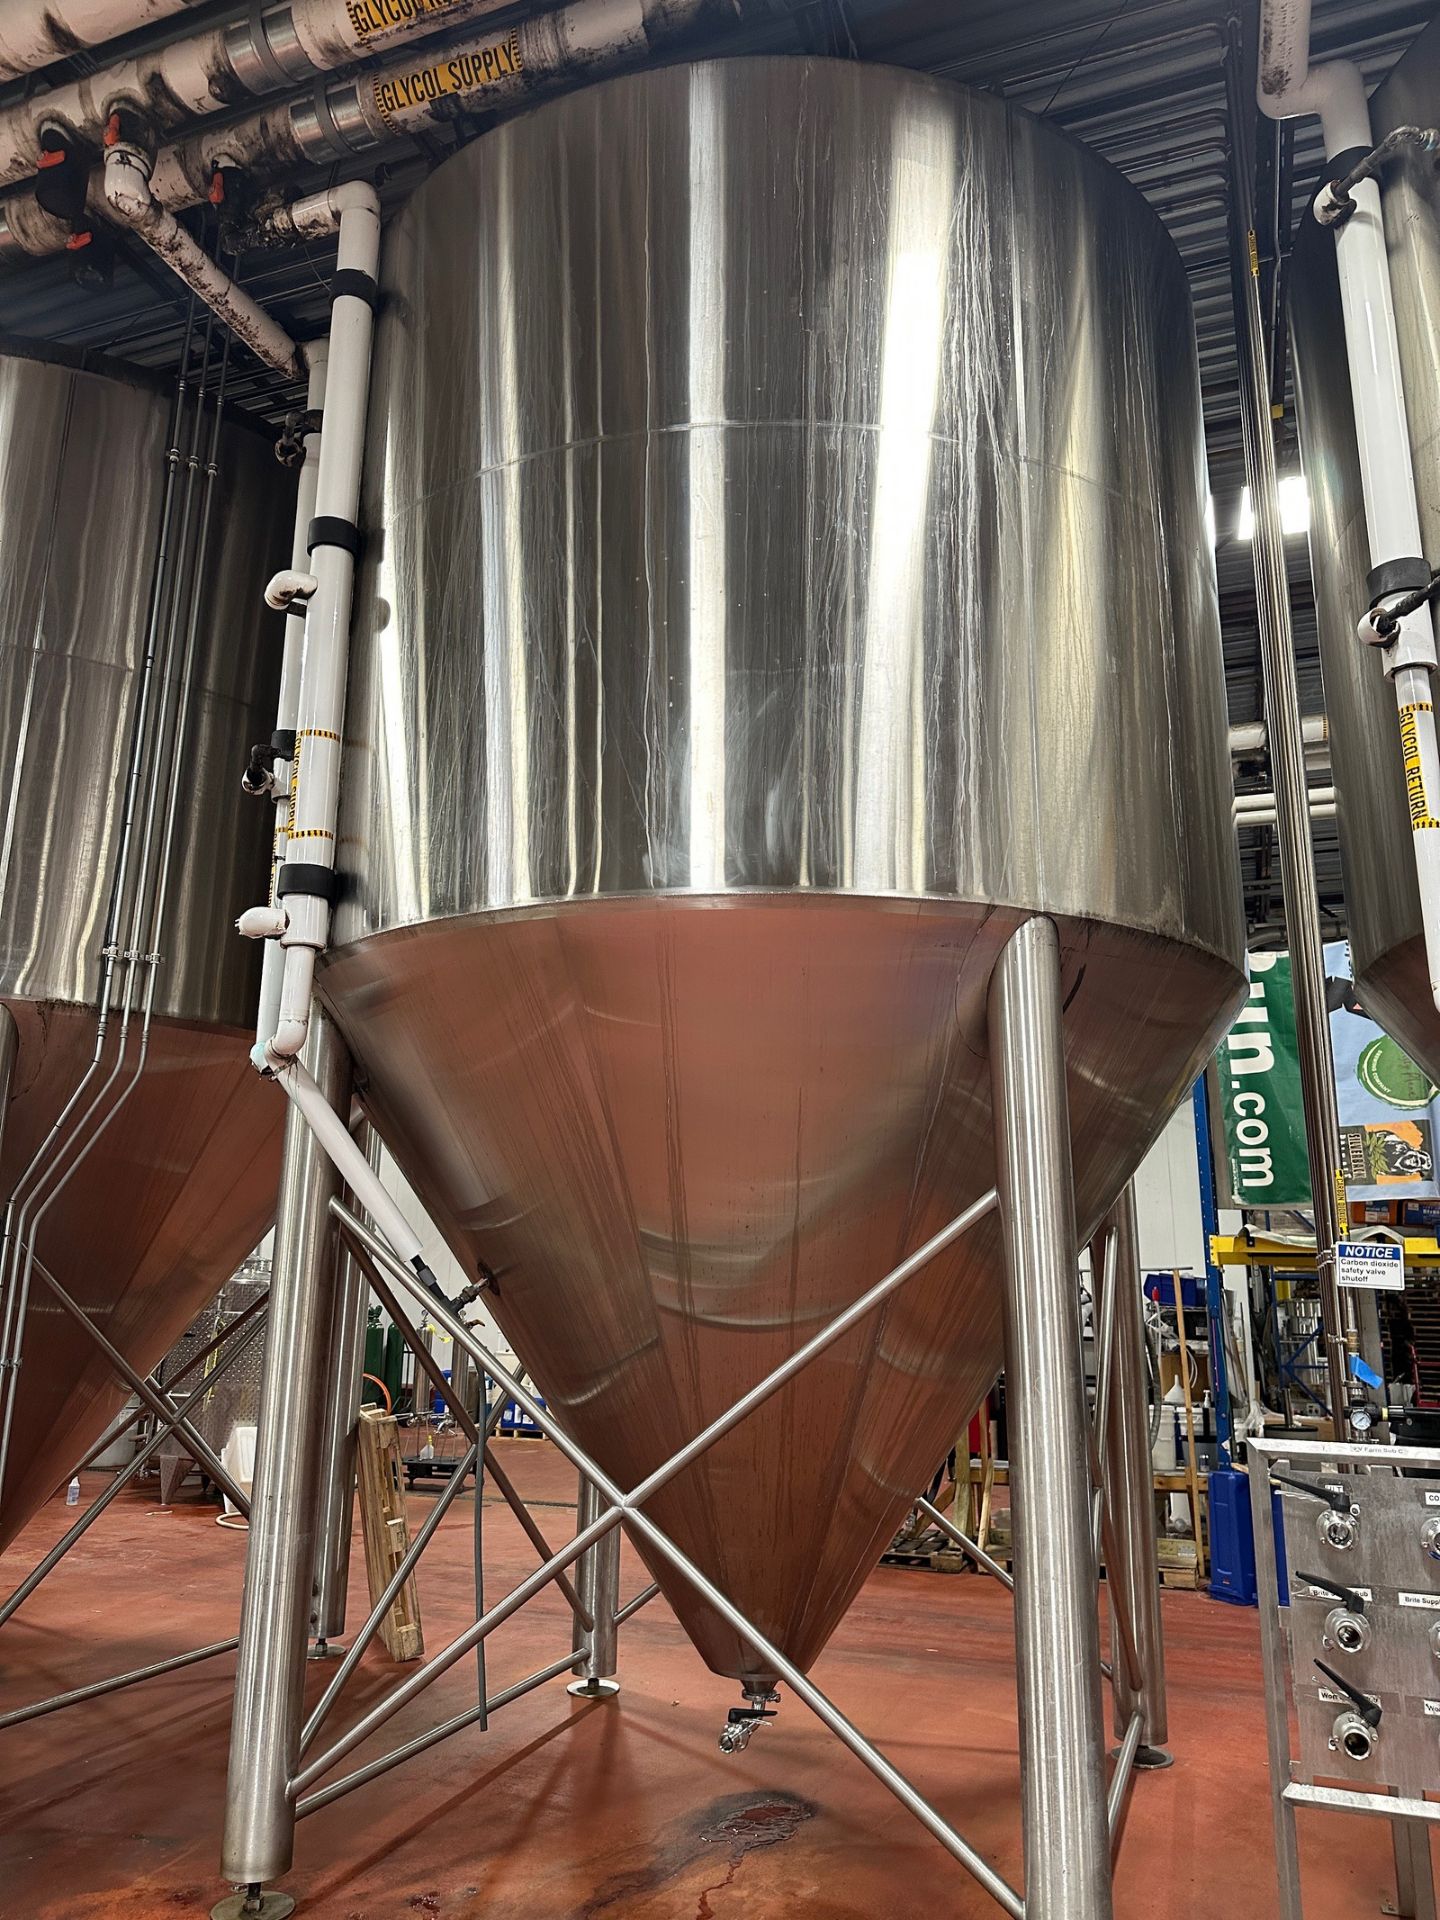 2016 - 300 BBL Specific Mechanical Stainless Steel Fermentation Tank - Cone Bottom, | Rig Fee $2900 - Image 4 of 6